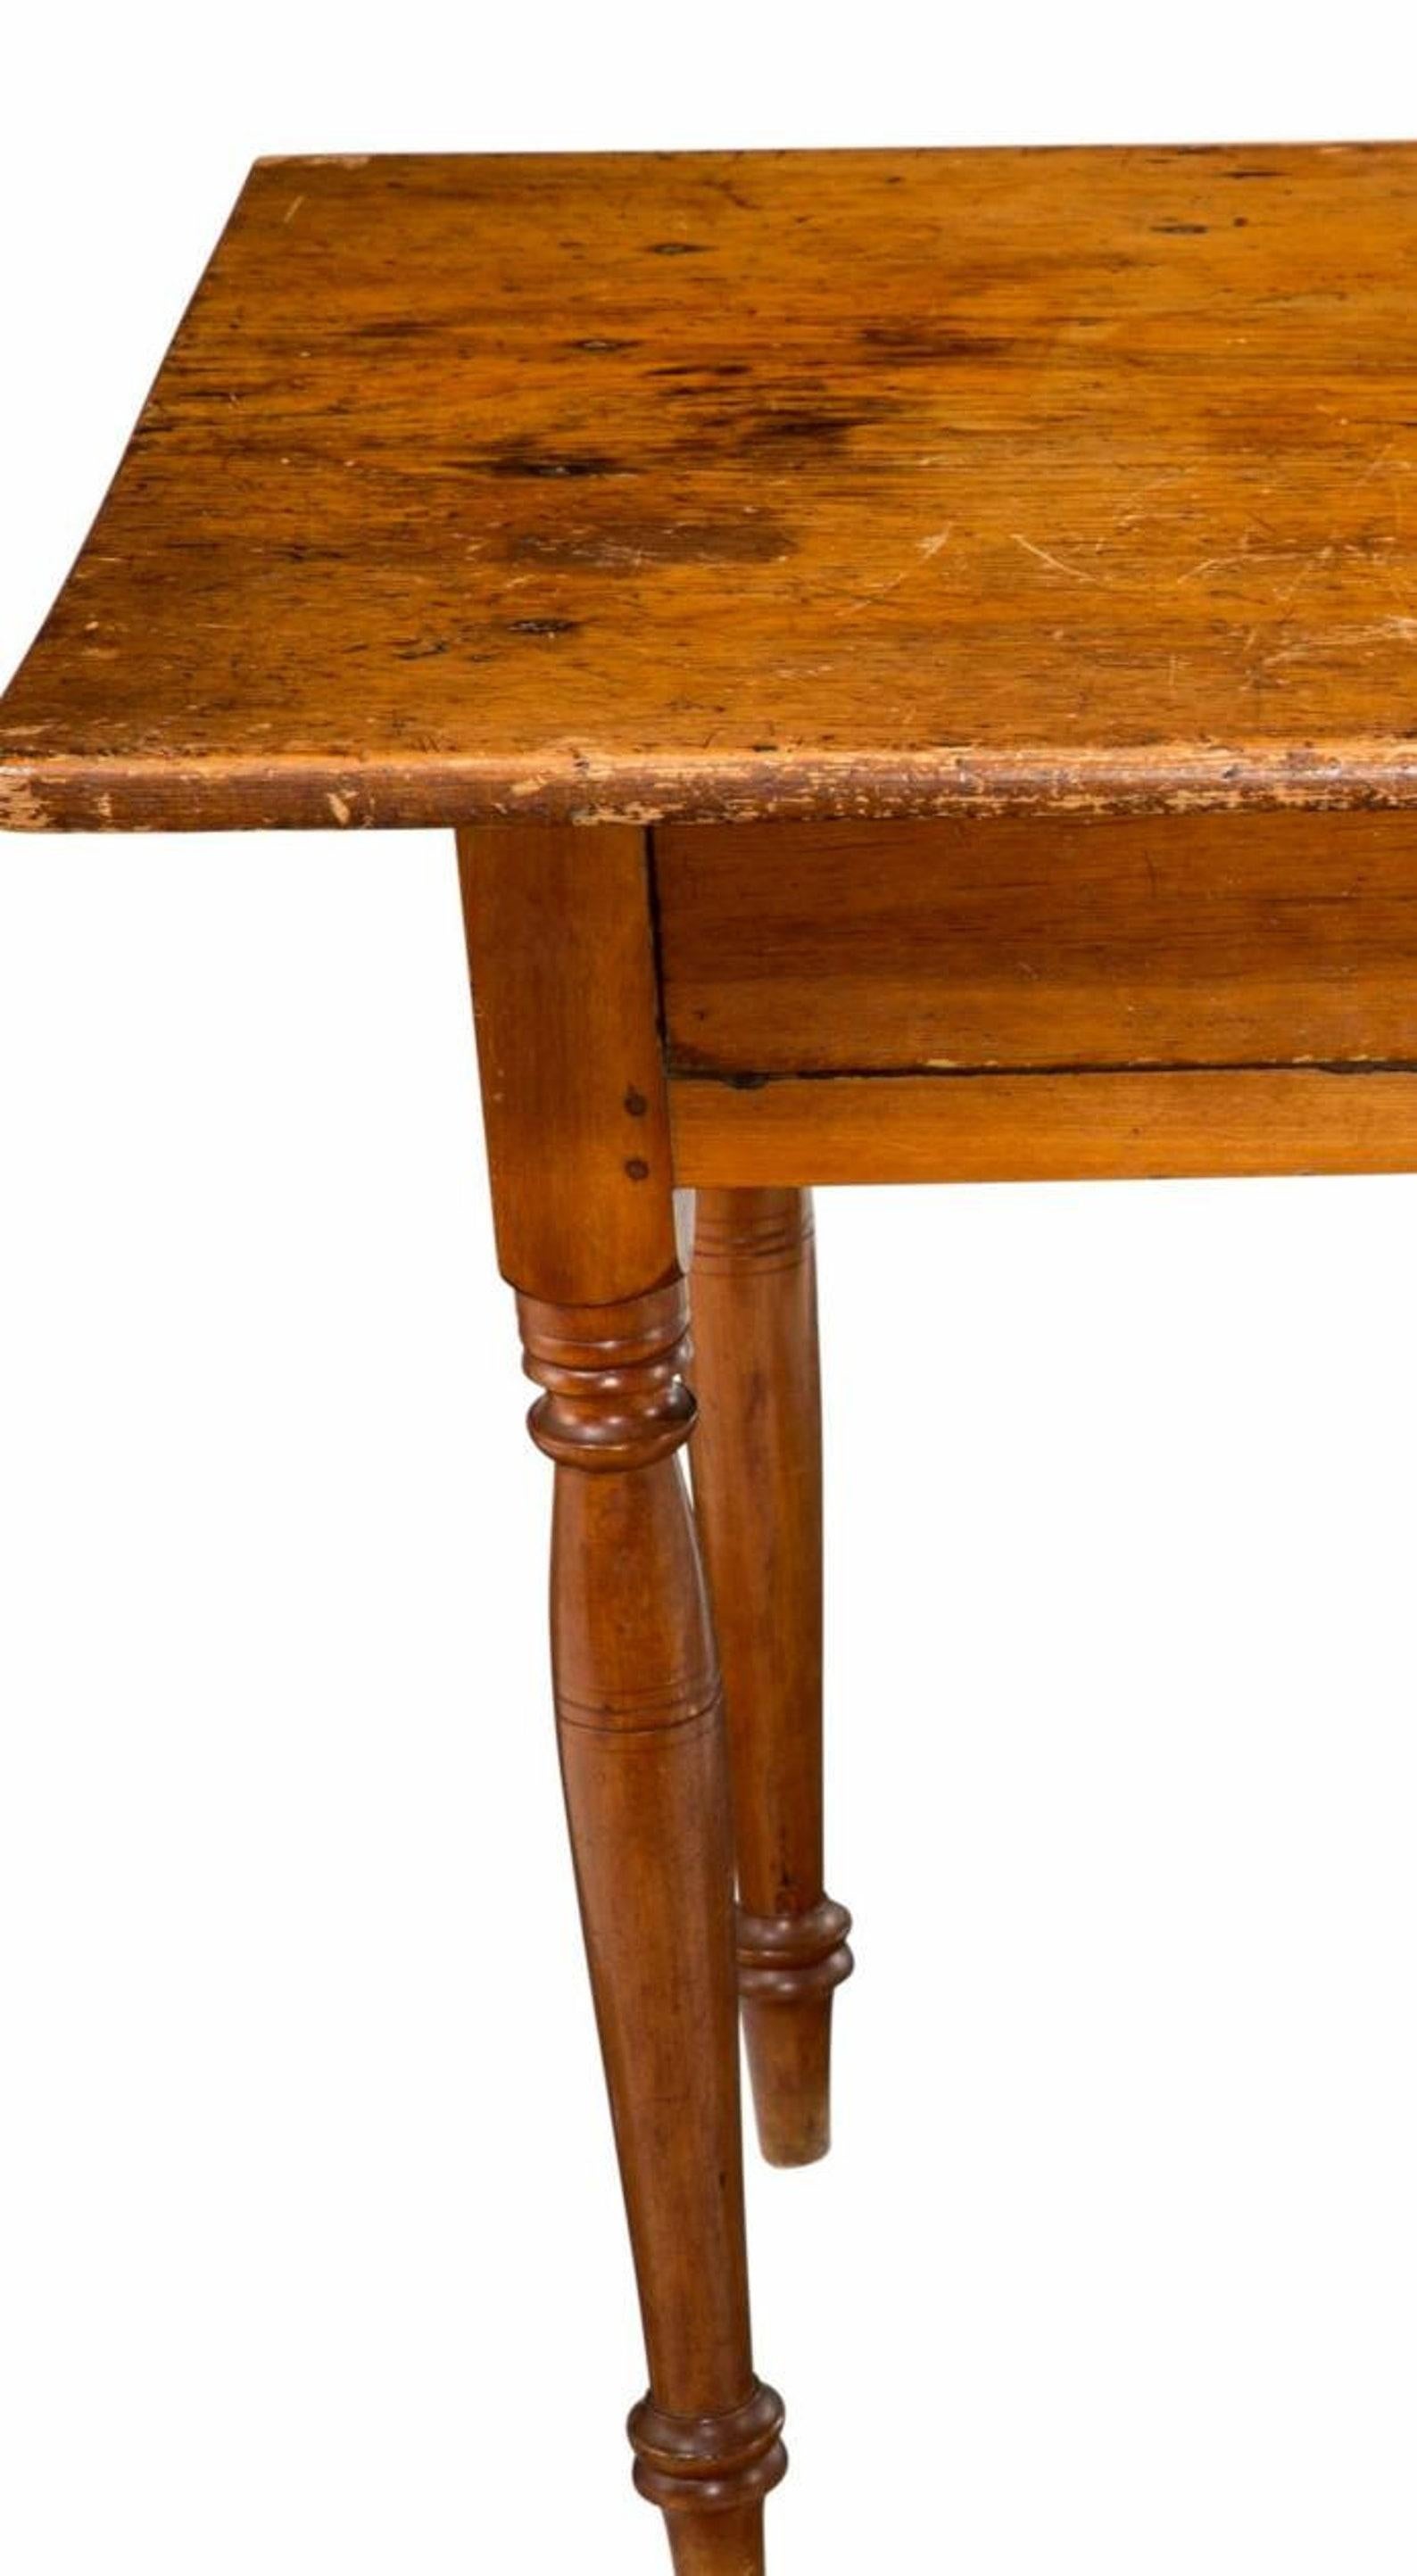 Hand-Crafted 18th Century Early American Country Tavern Table